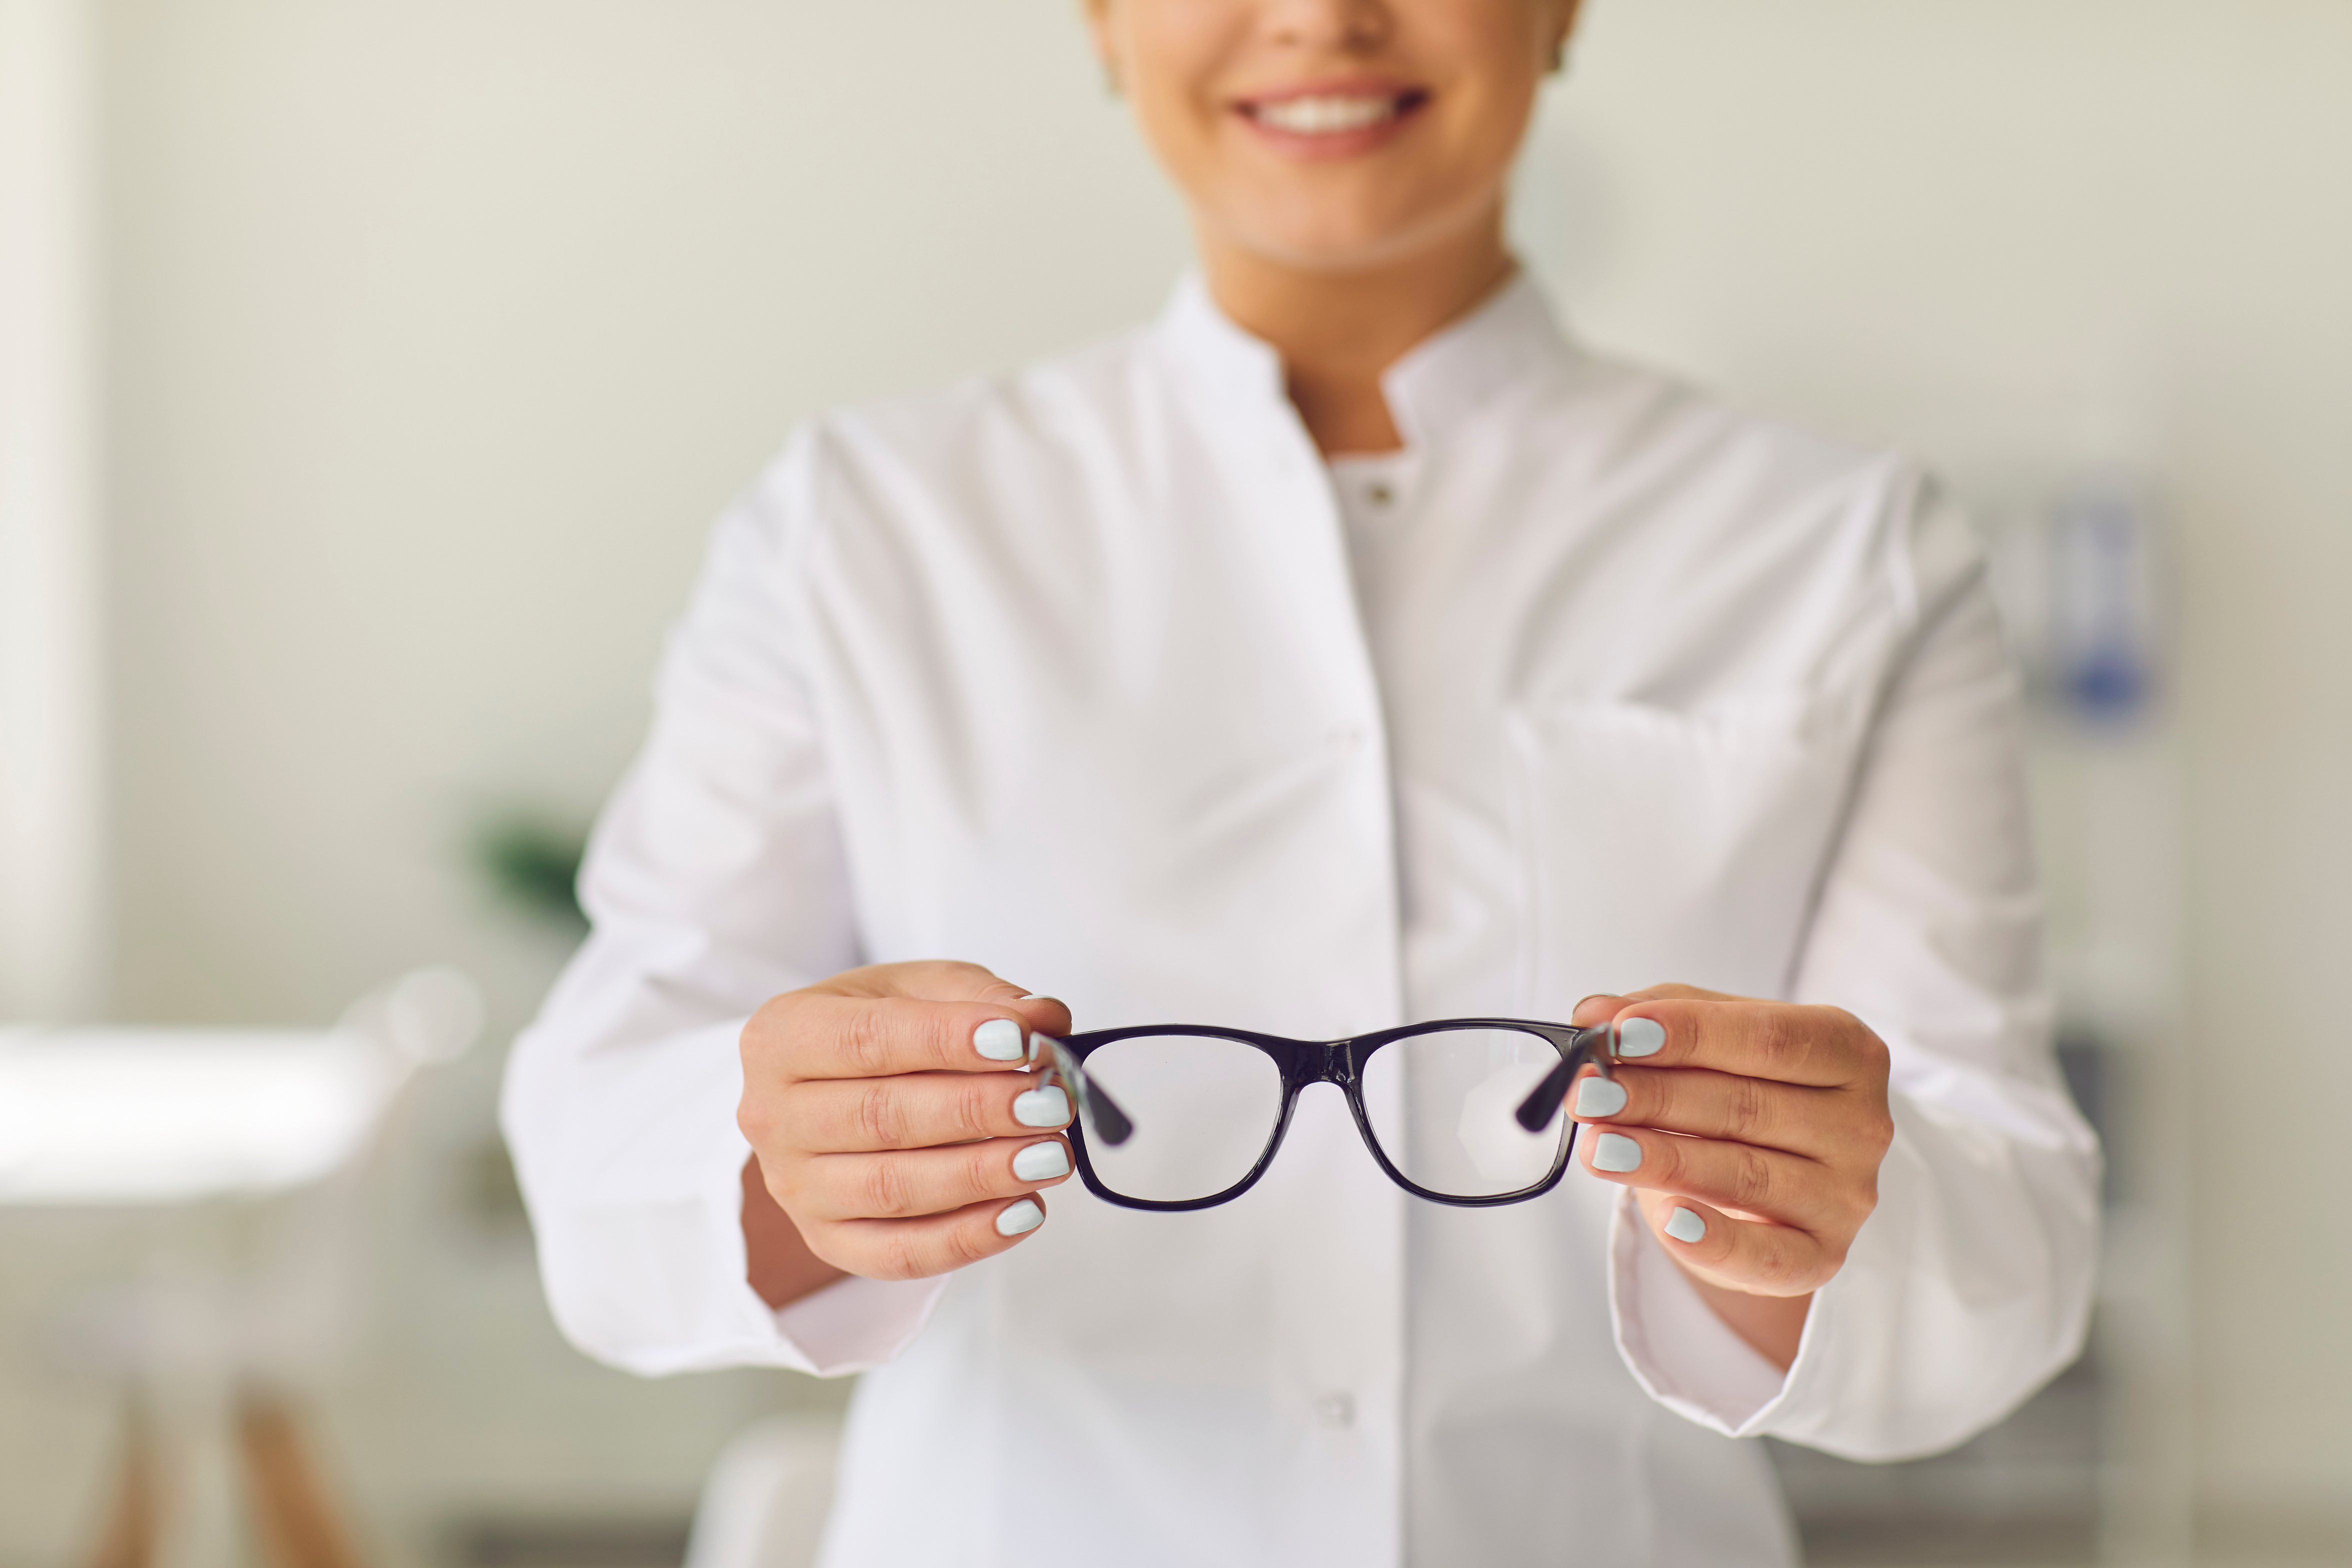 Professional Vision Specialist in a Clinic or Store Holding a Pair of Glasses with New Lenses.